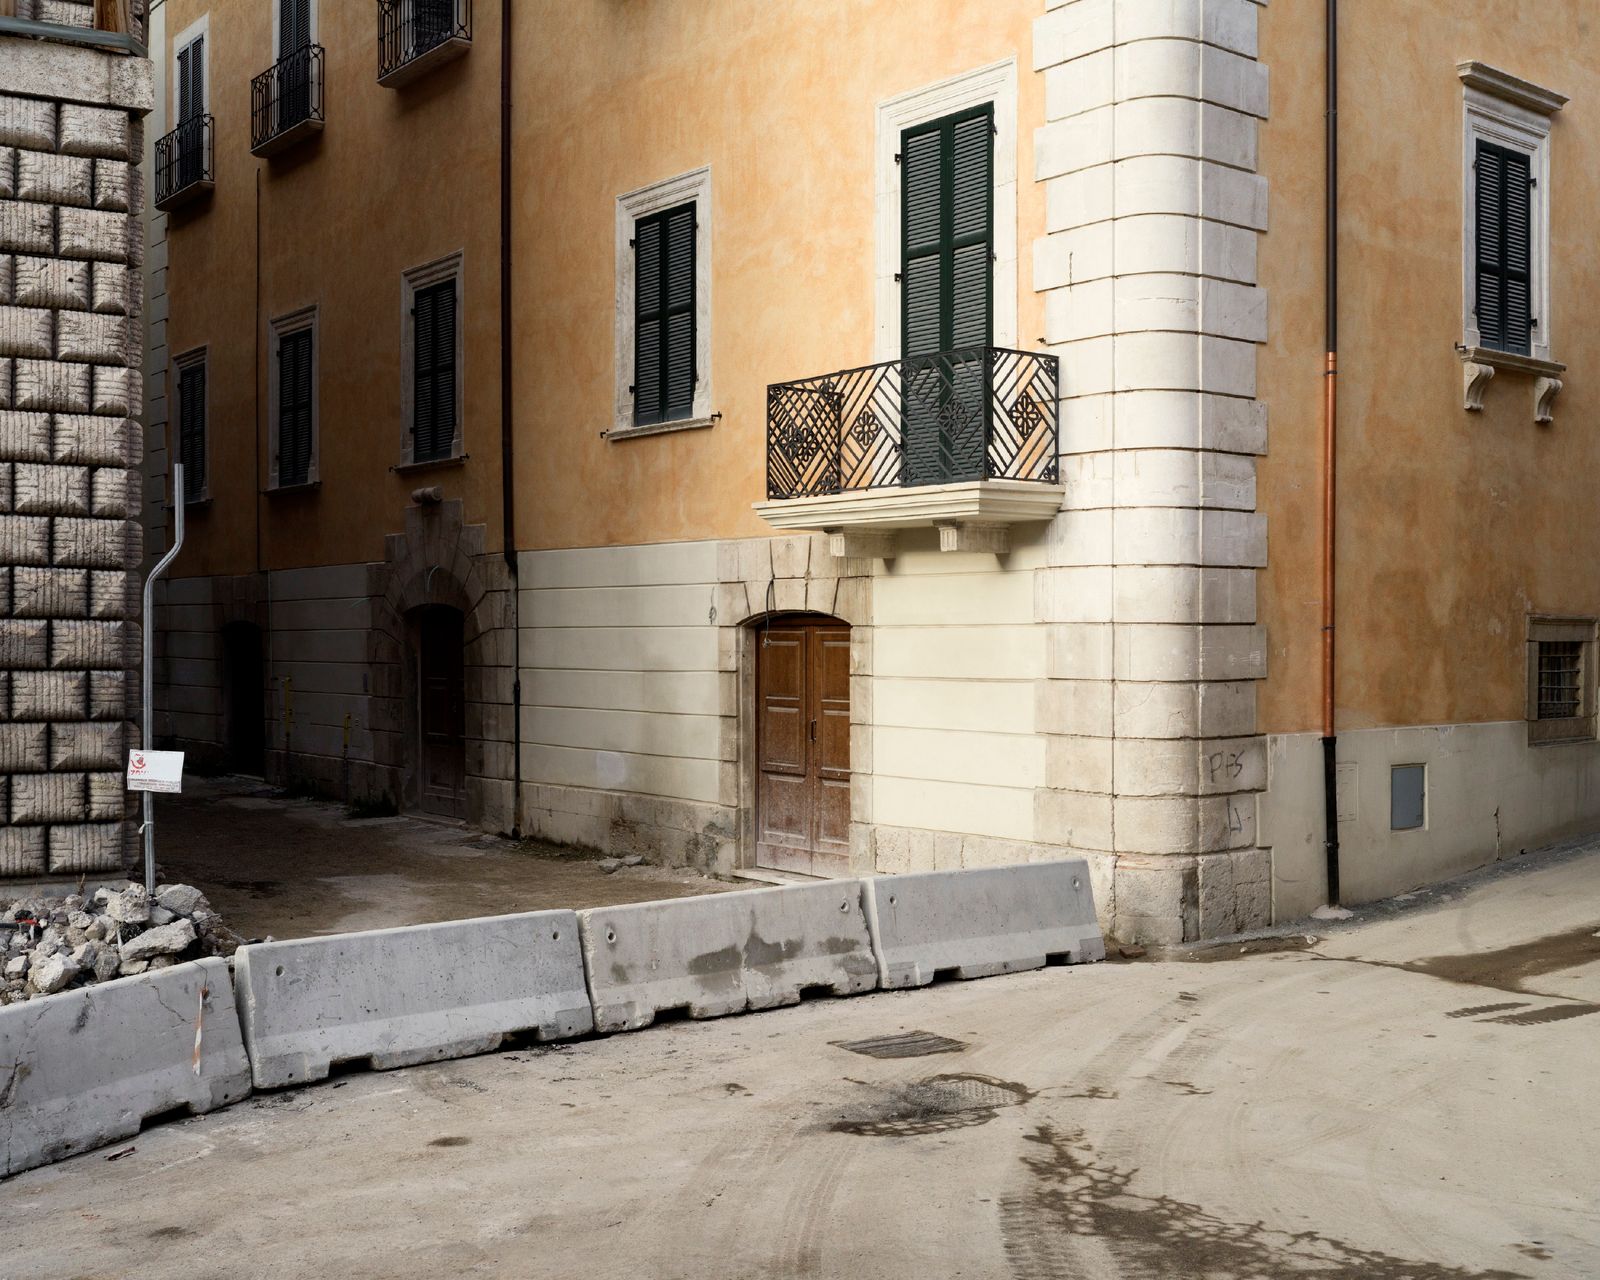 © Giovanni Cocco - Image from the DISPLACEMENT - NEW TOWN NO TOWN photography project